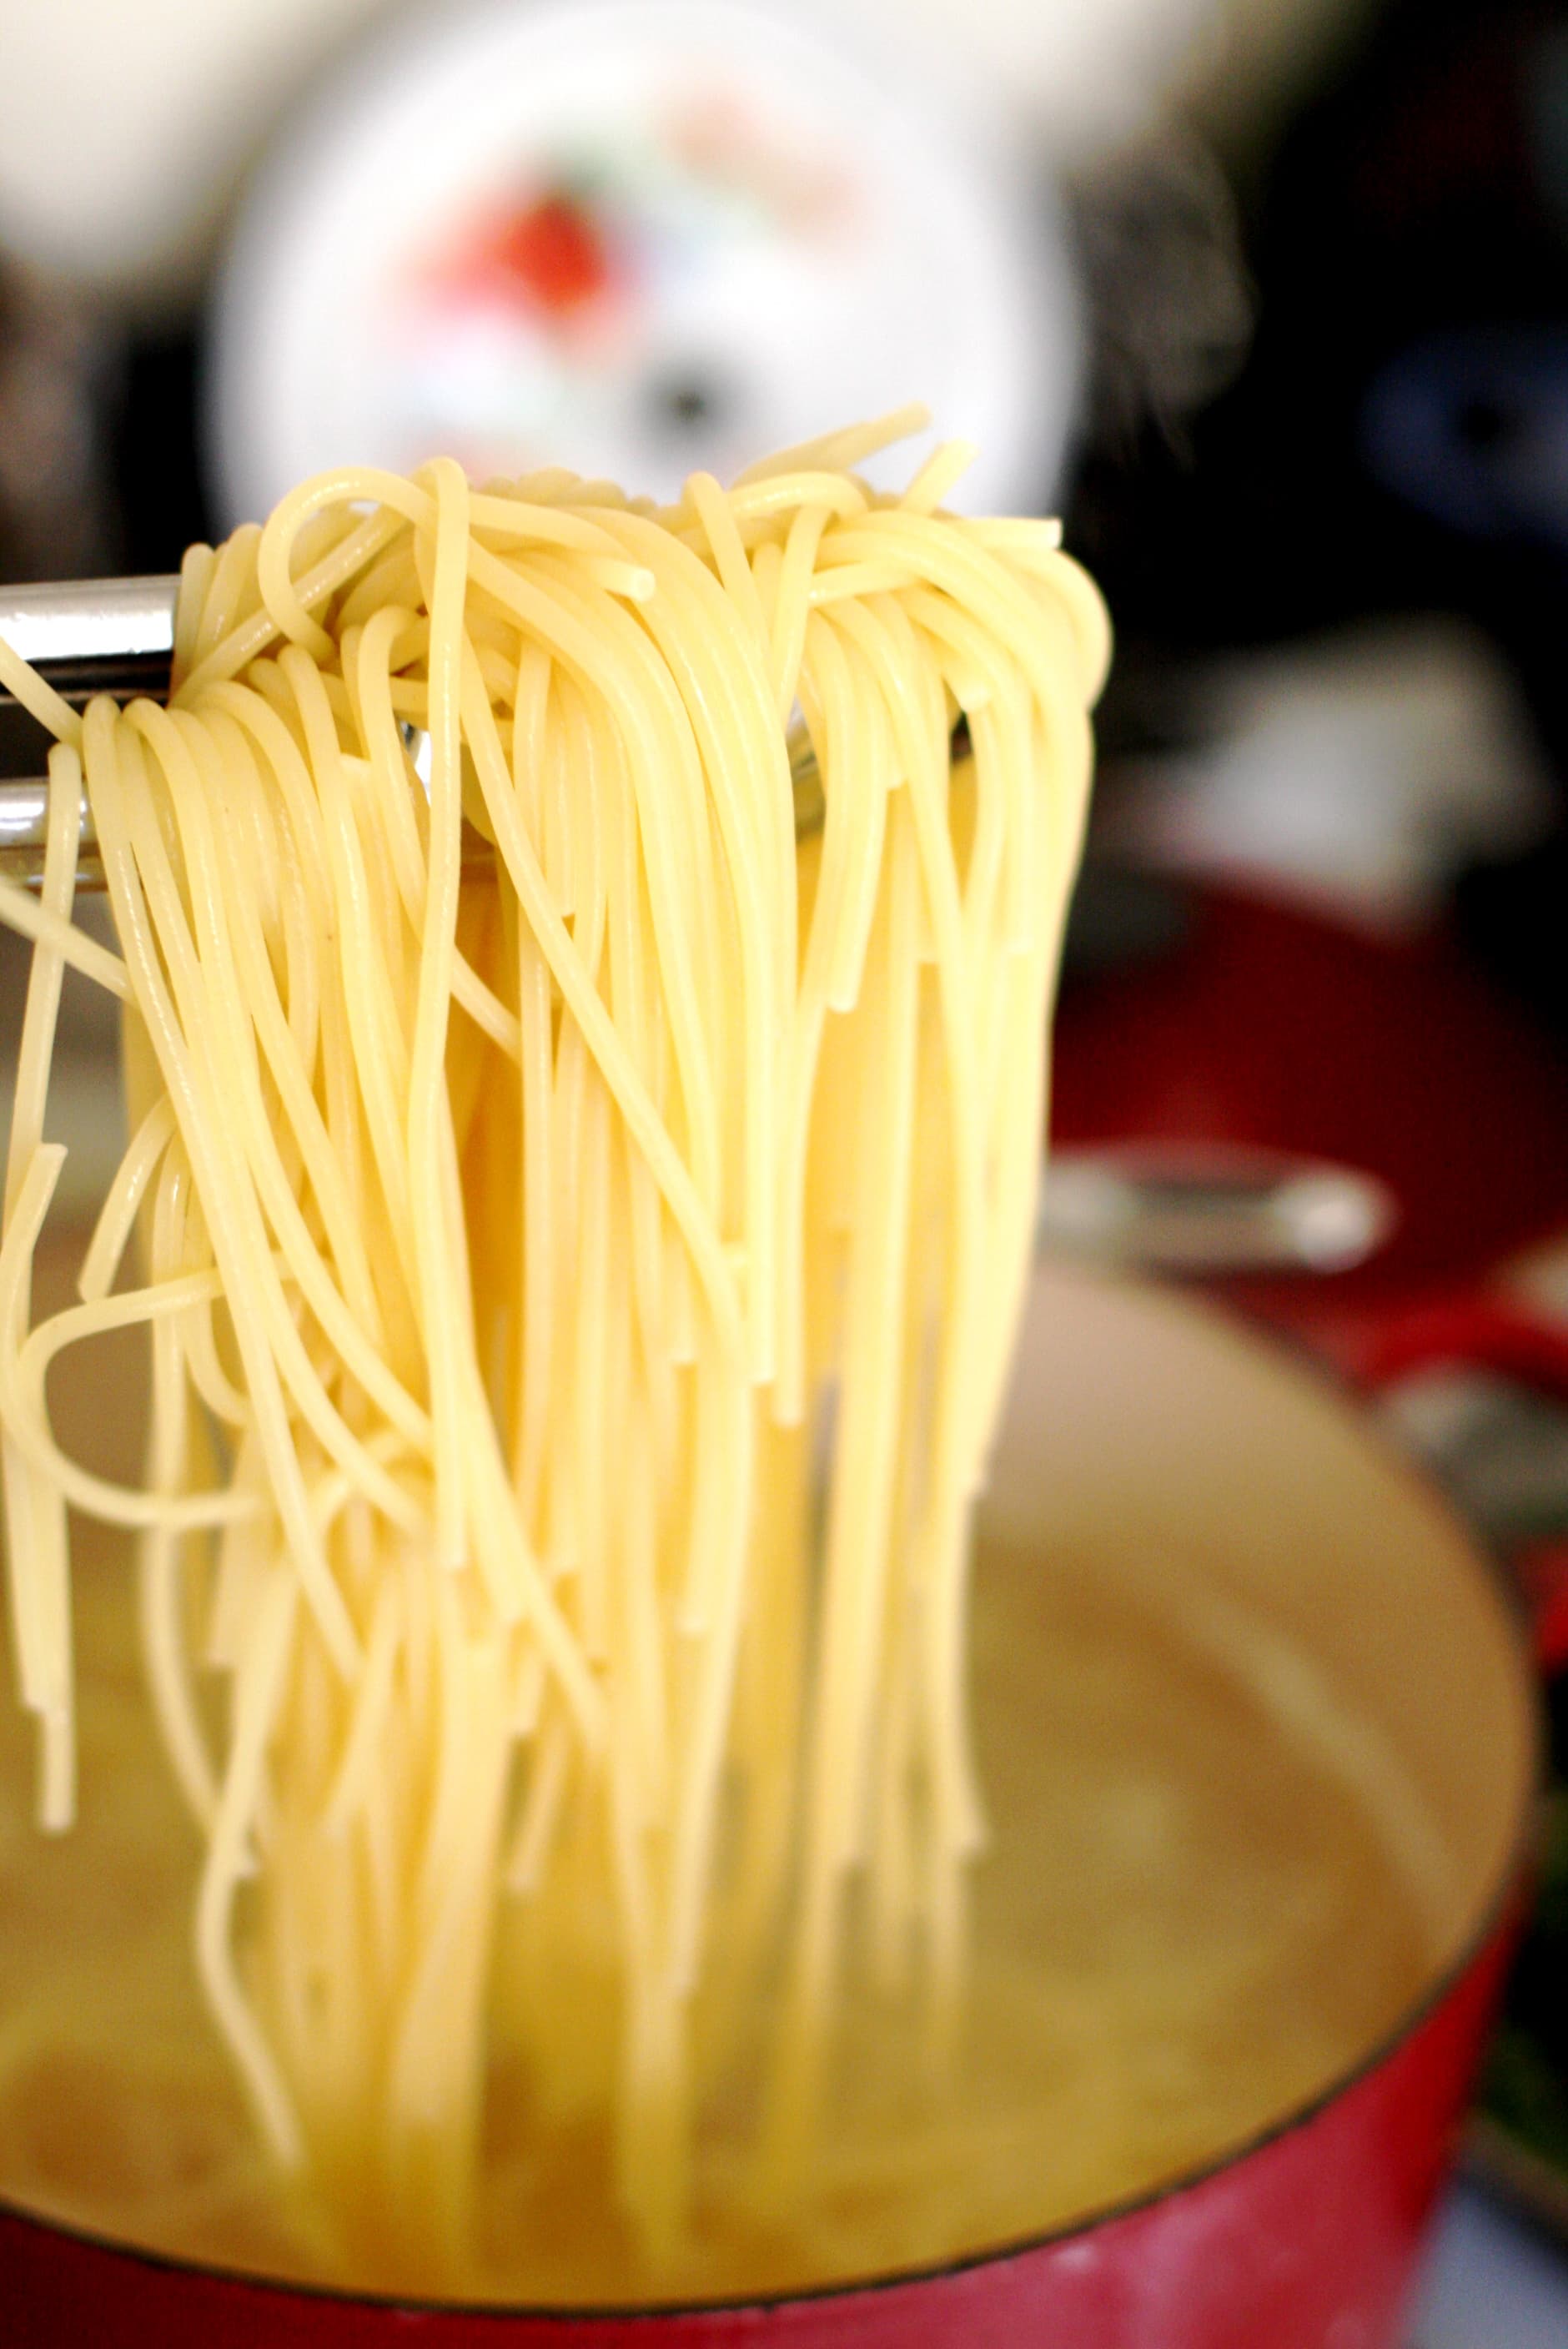 How To Cook Dried Pasta (Easy Step-by-Step Guide) | Kitchn